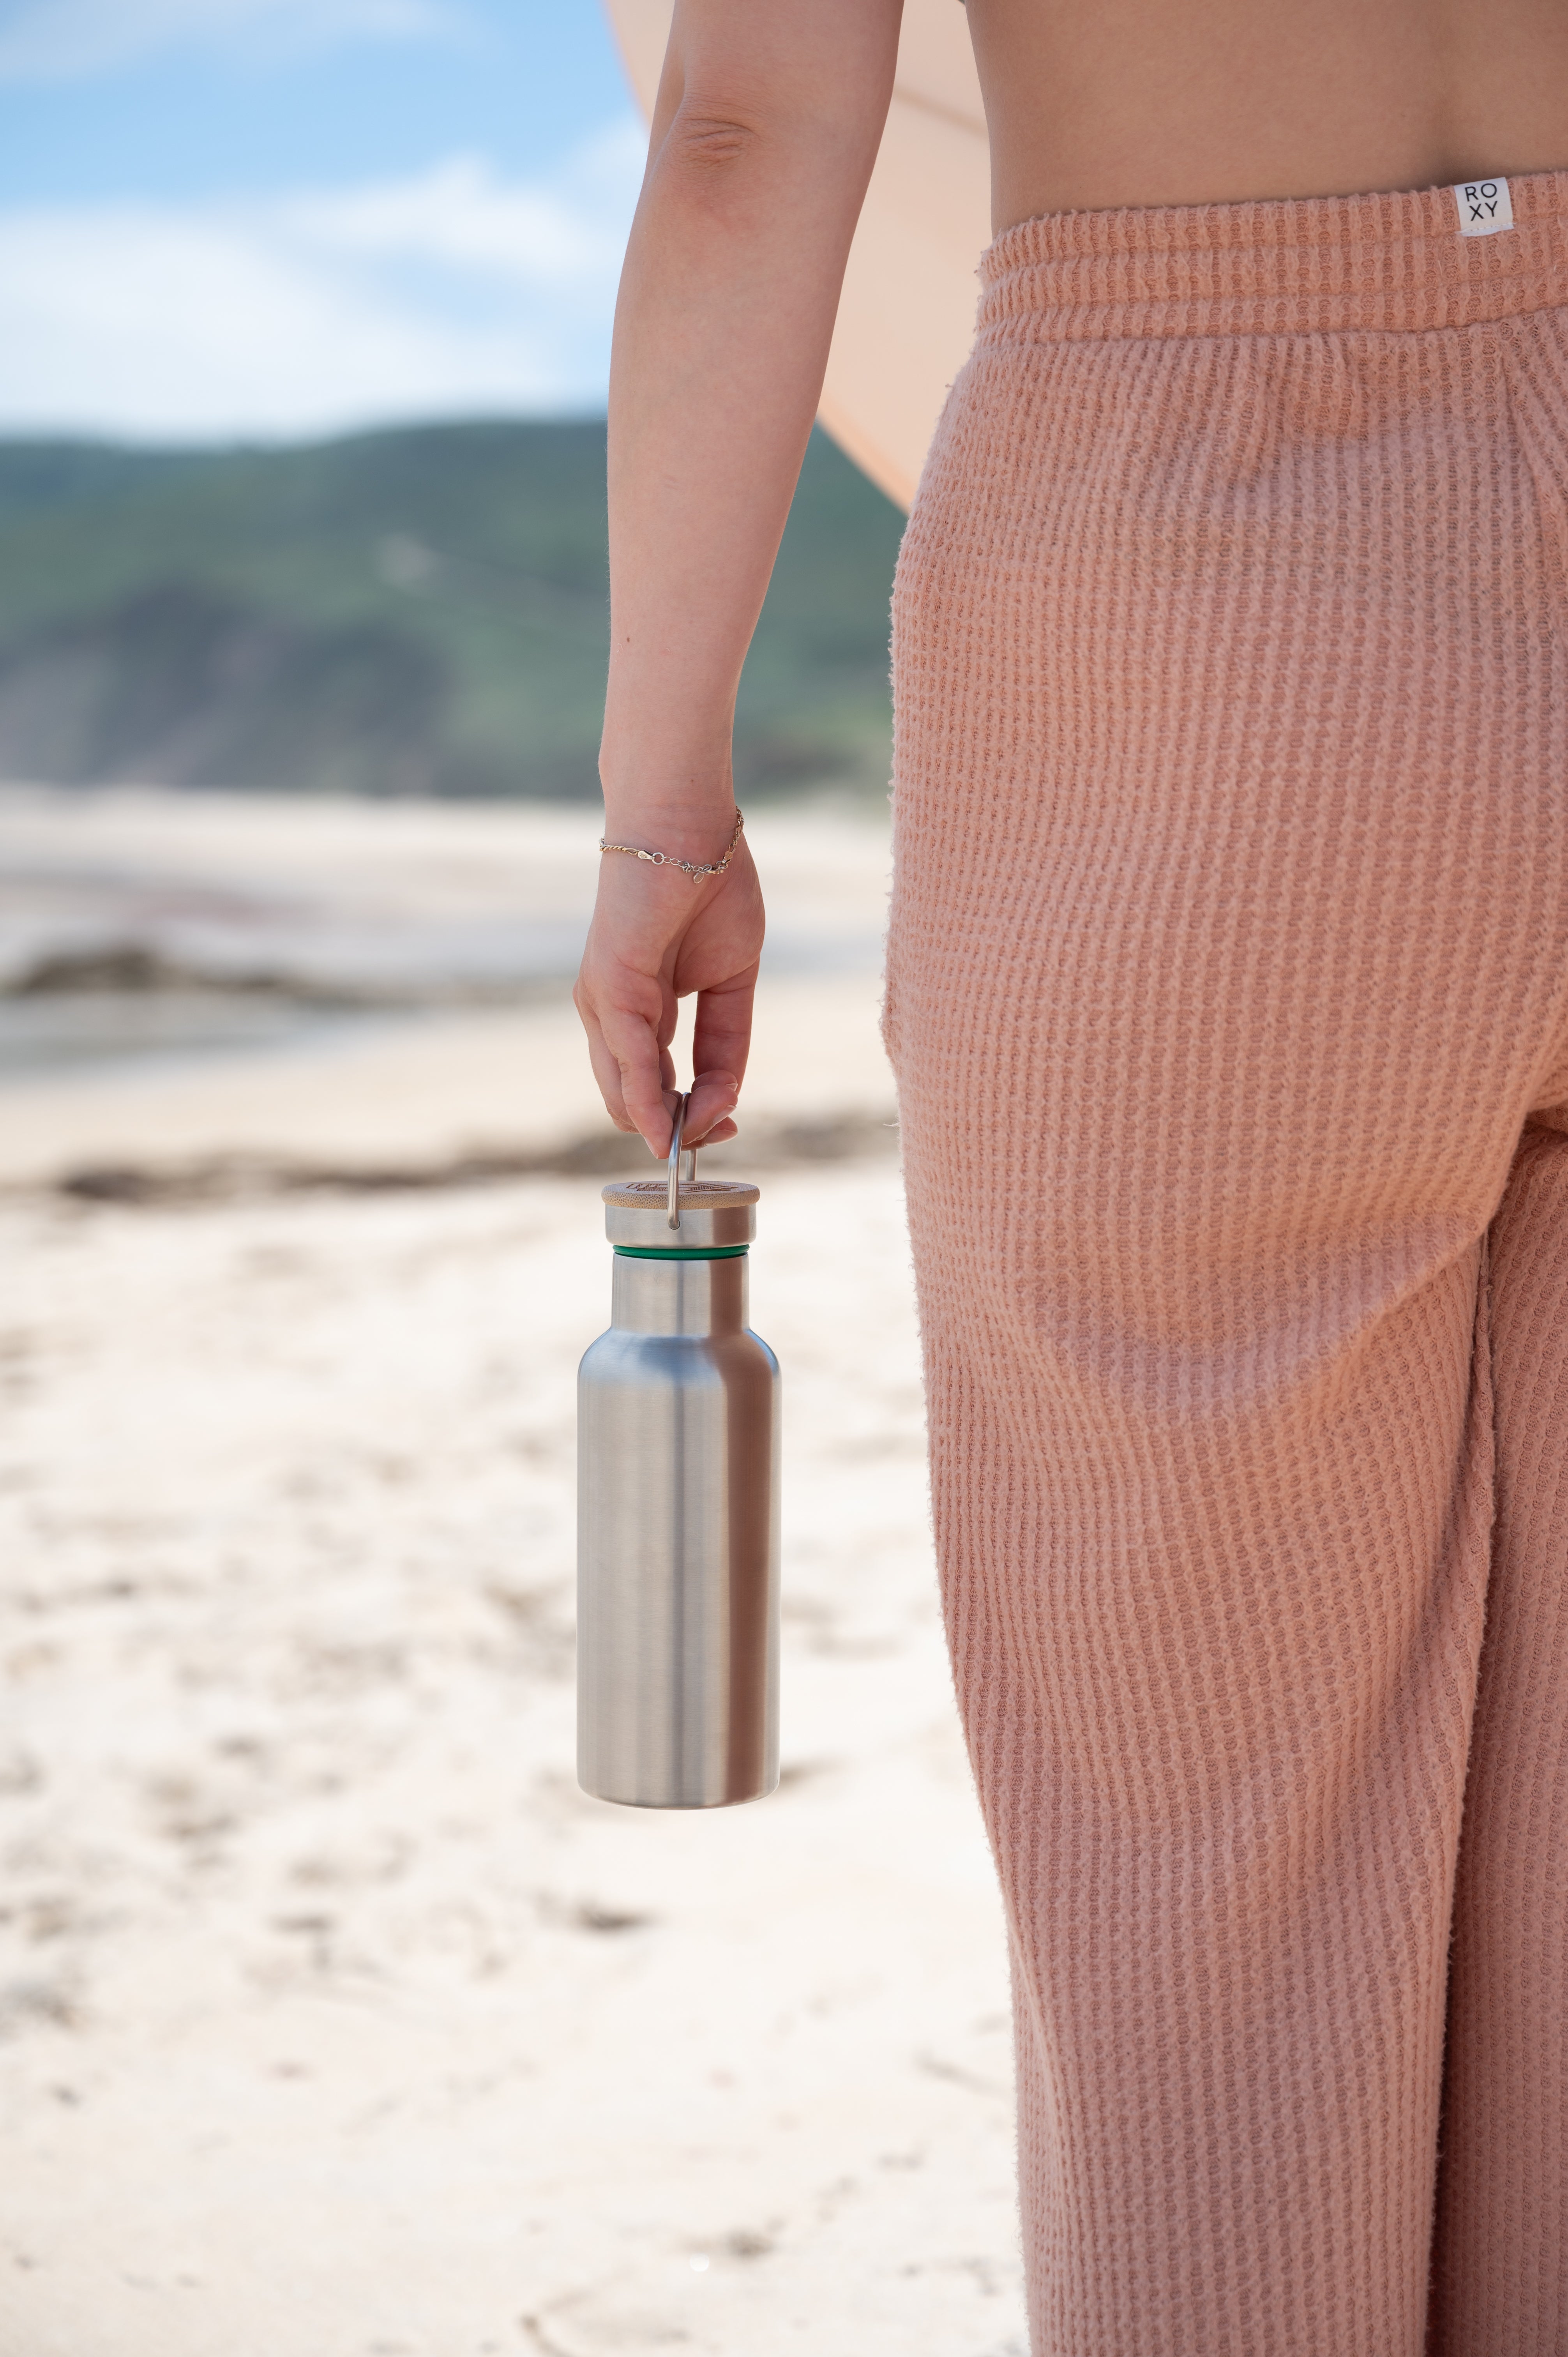 Blockhuette sainless steel water bottle being held by a girl at the beach